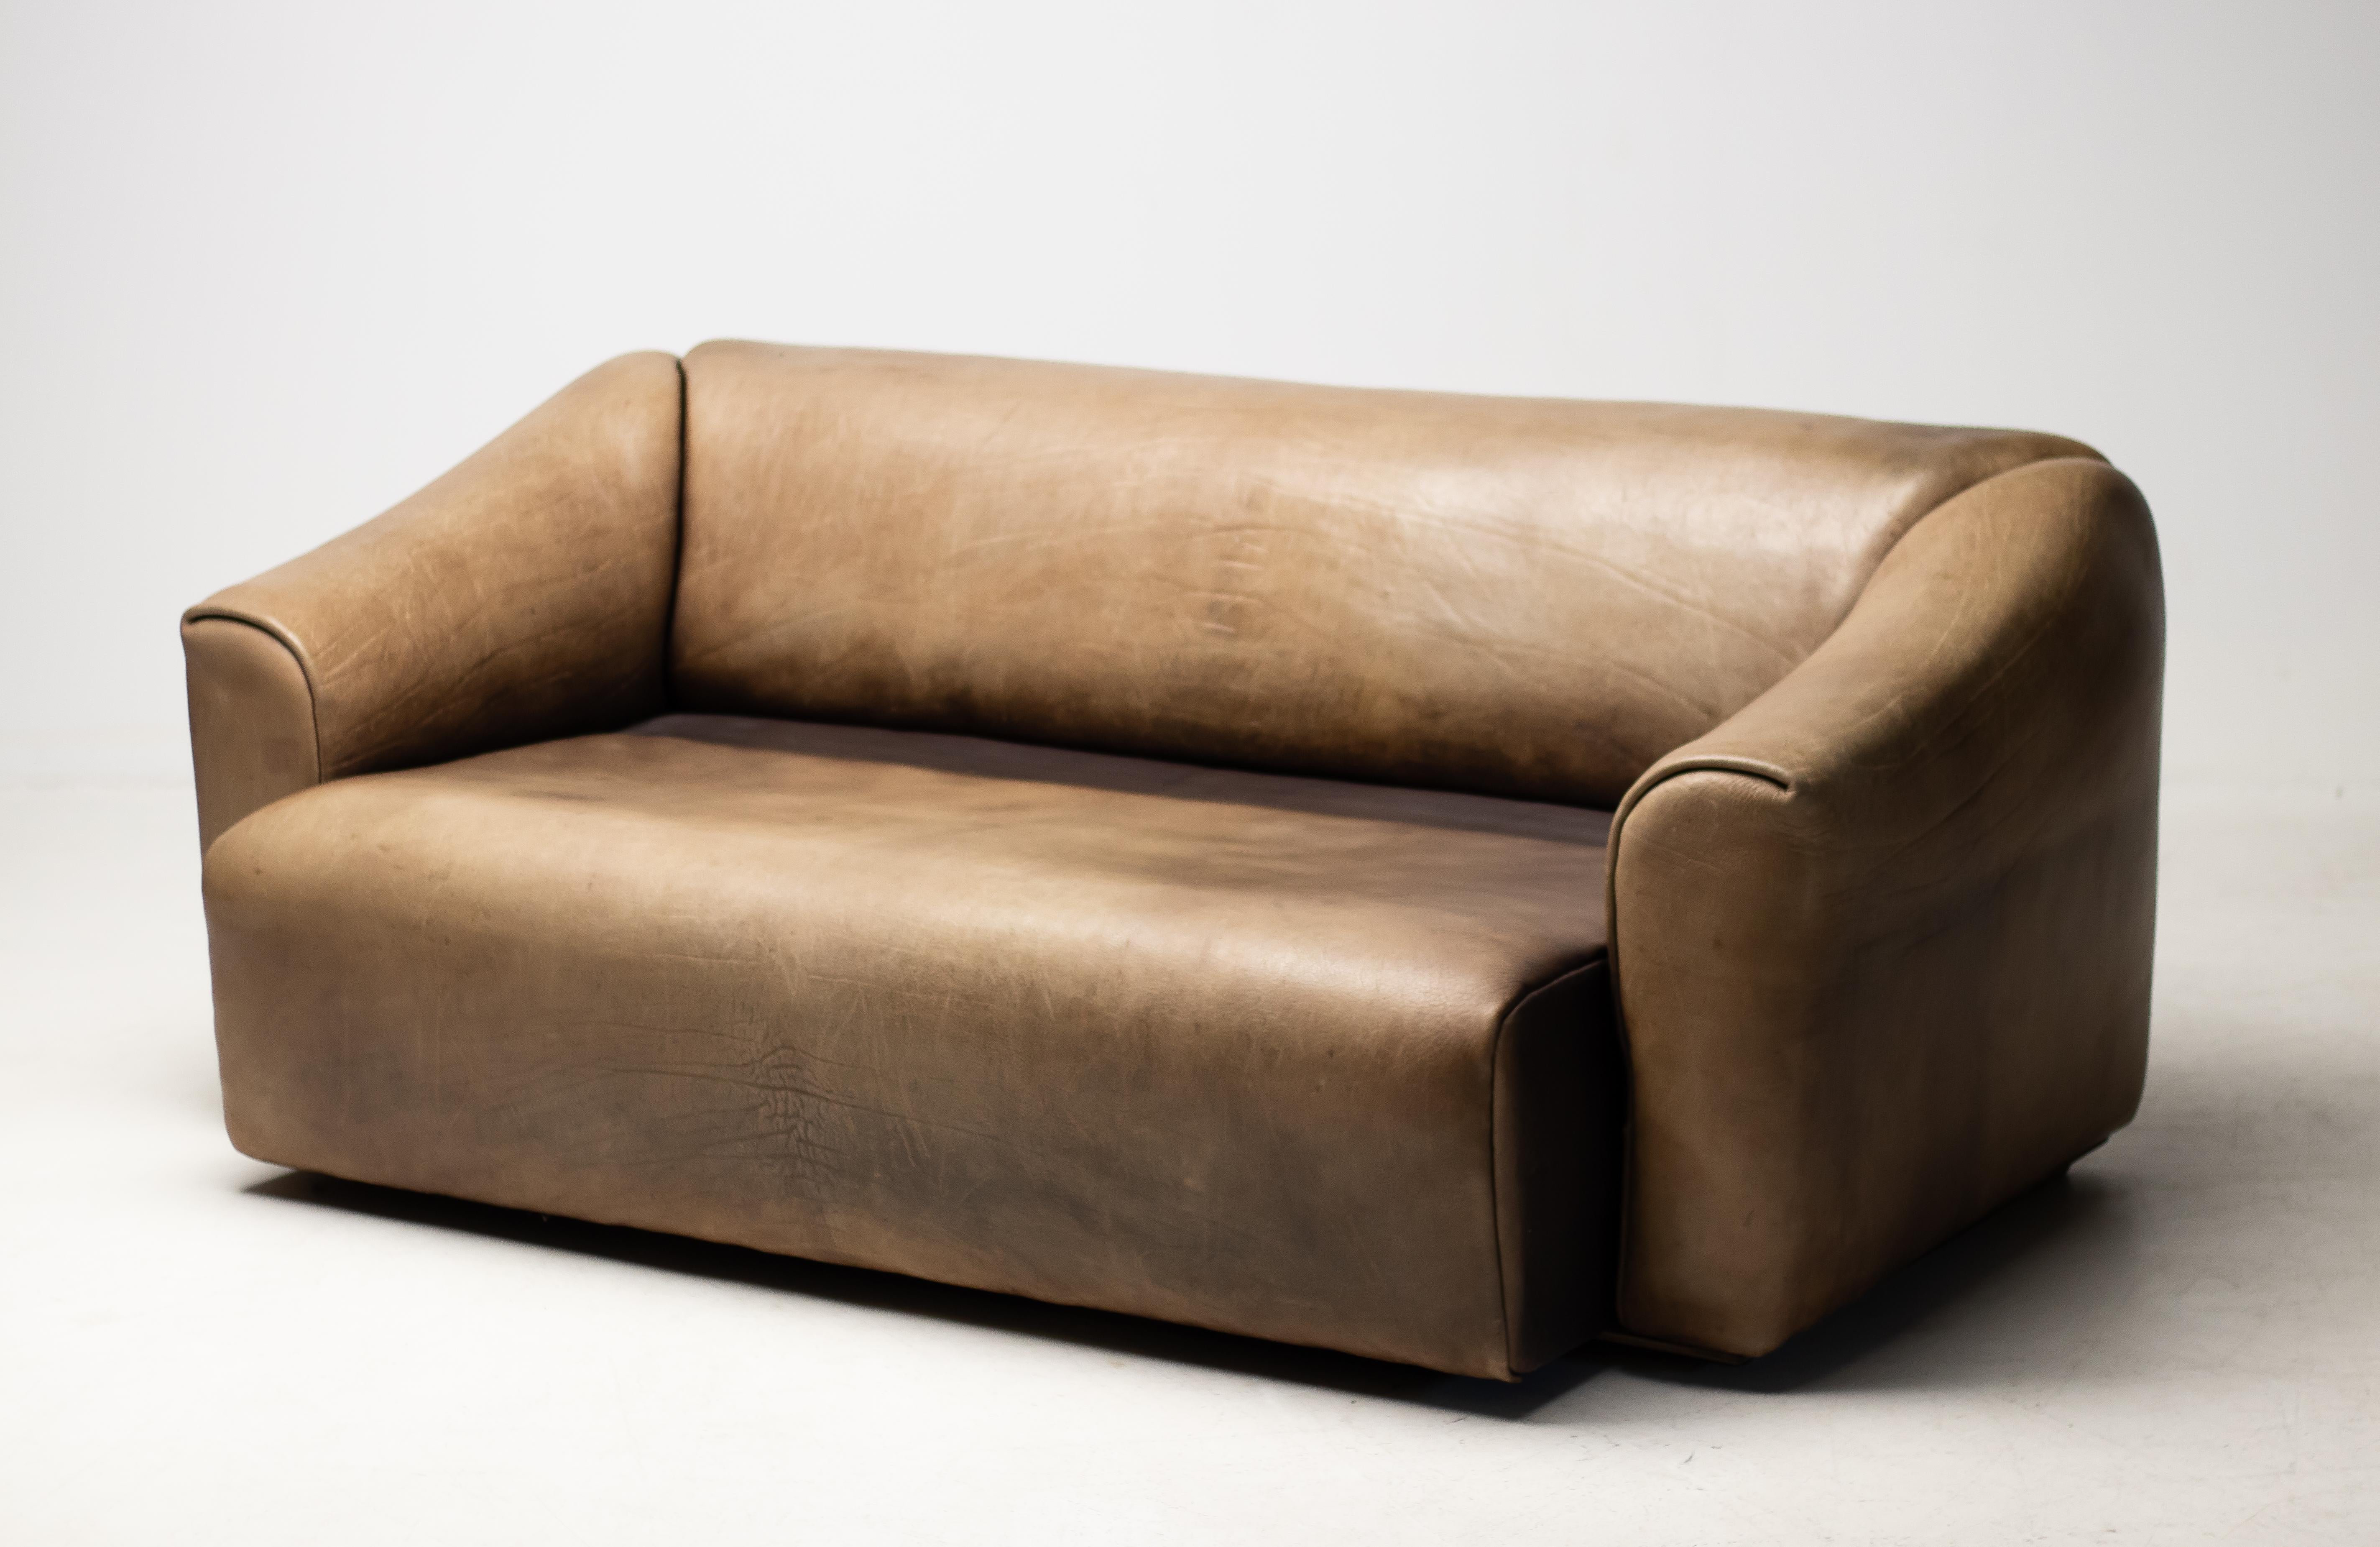 Very comfortable De Sede, DS-47 sofa in buffalo leather, Switzerland, 1970s. 
The design is basic, yet very modern. The seat is extendable for more comfort. The thick leather is laid in one piece, from the outside working inwards. The high quality